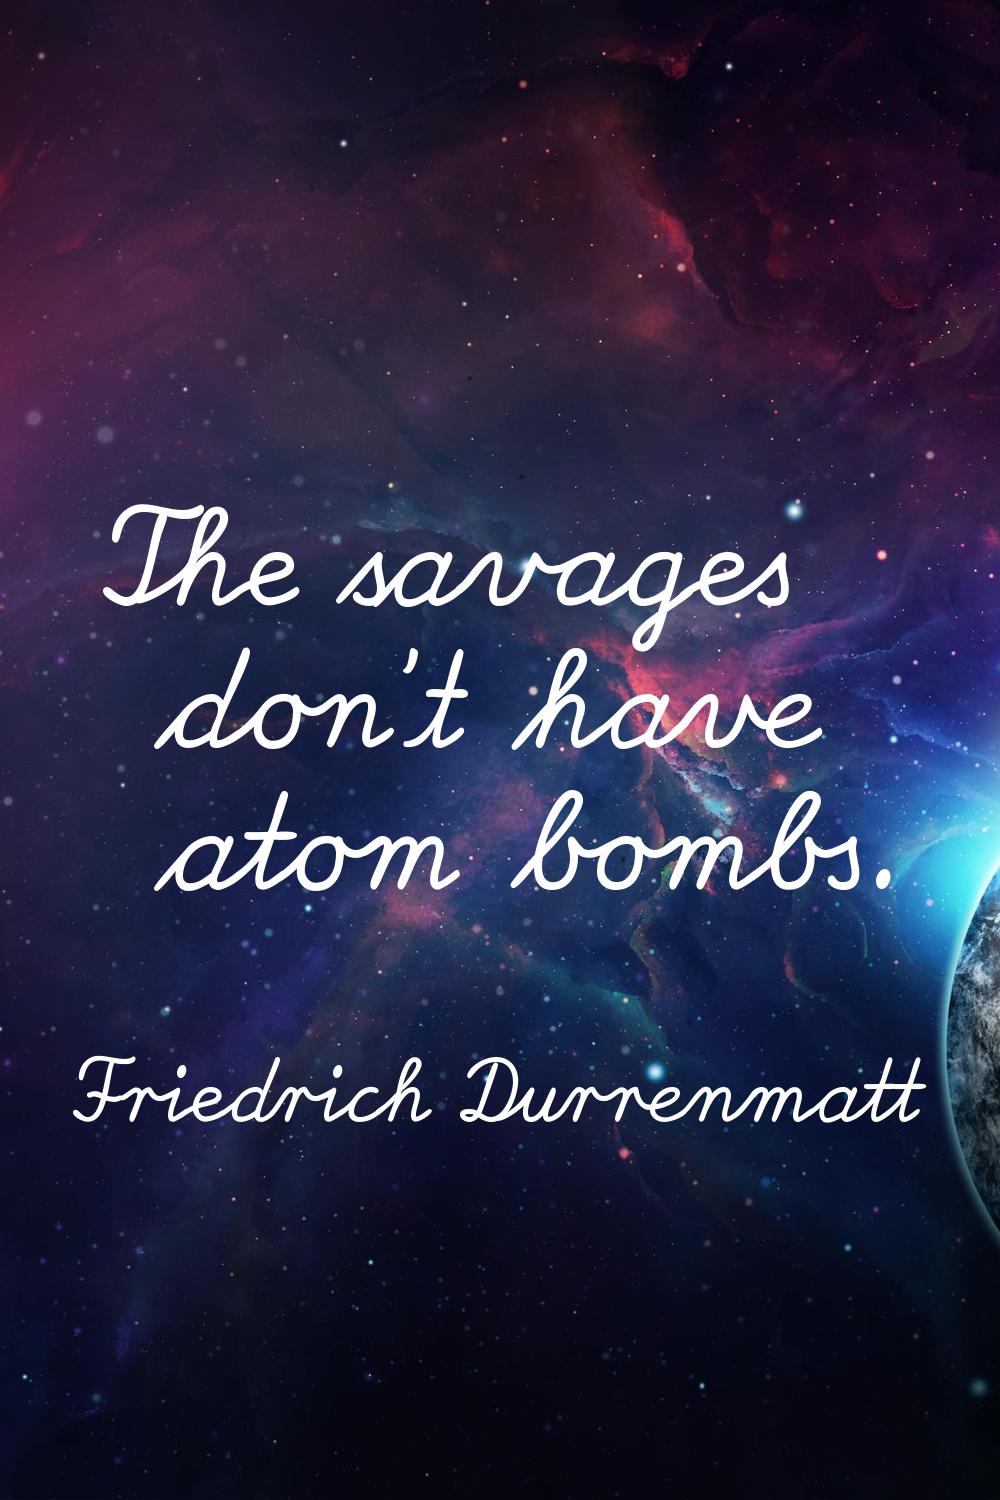 The savages don't have atom bombs.